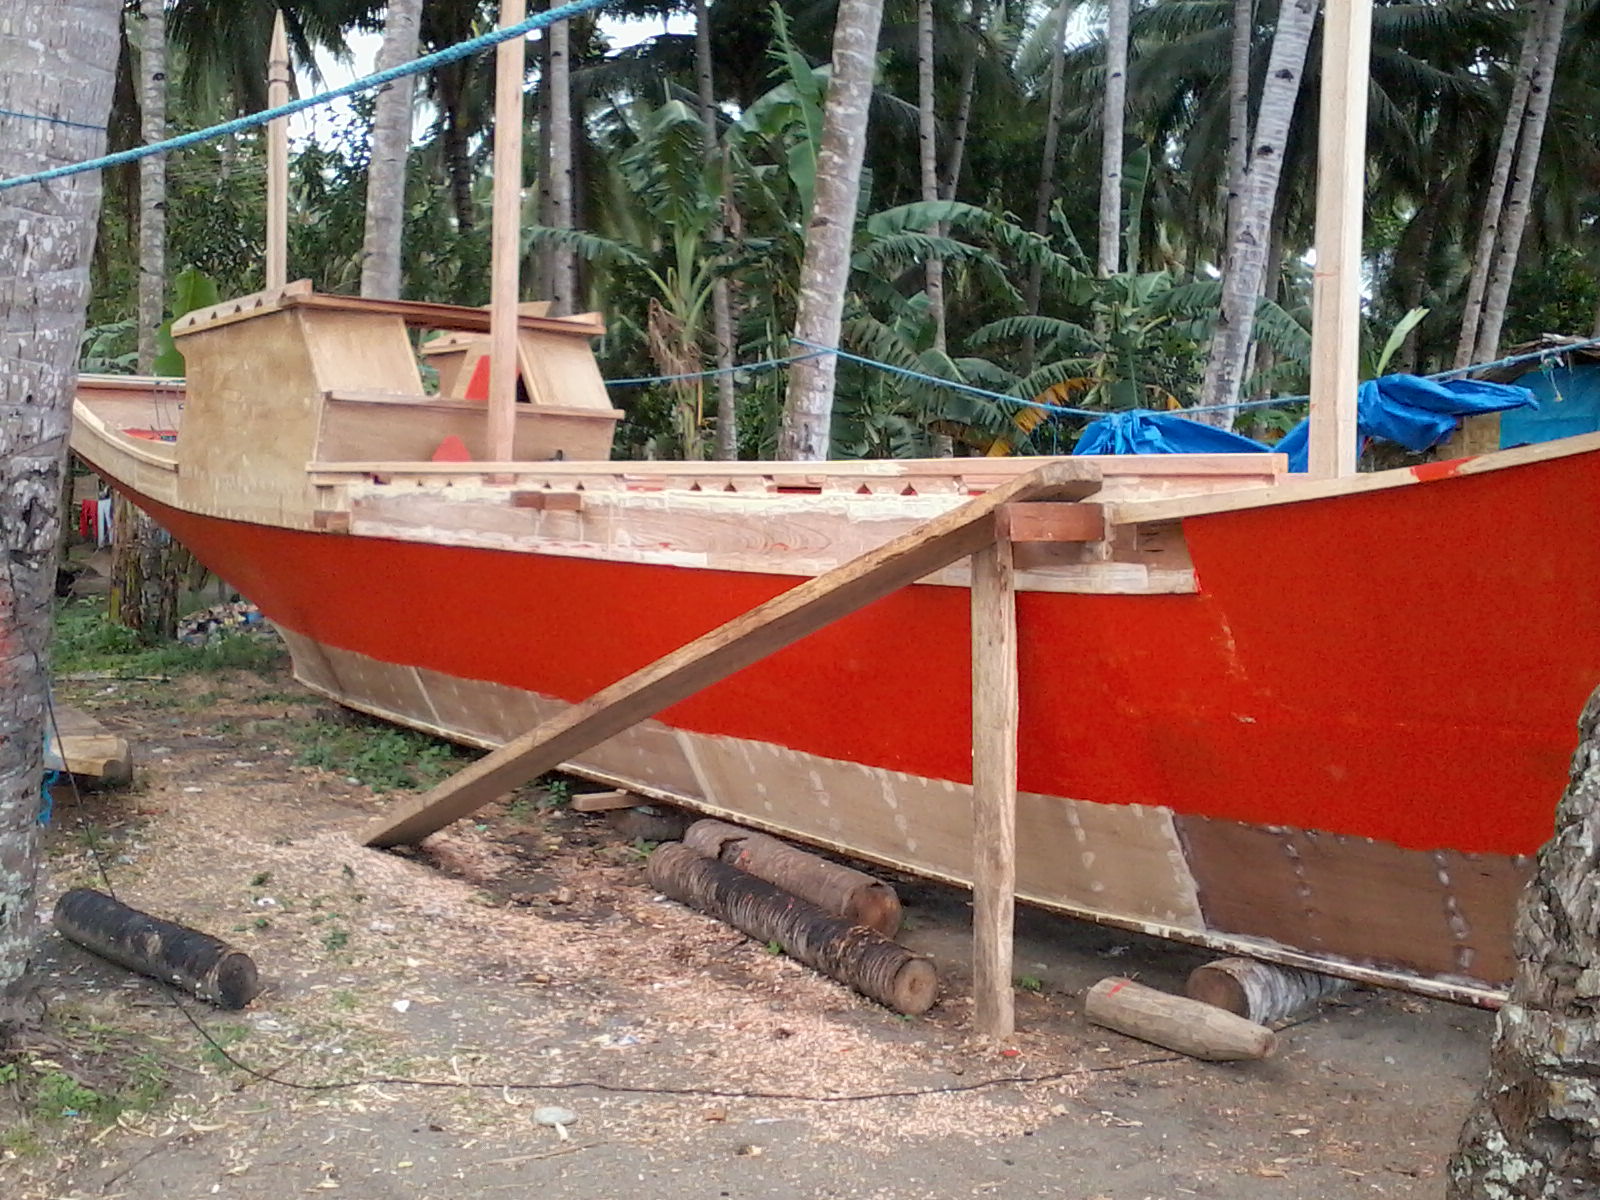 Philippine Tuna Fishing: What Kind of Plywood Works Best ...